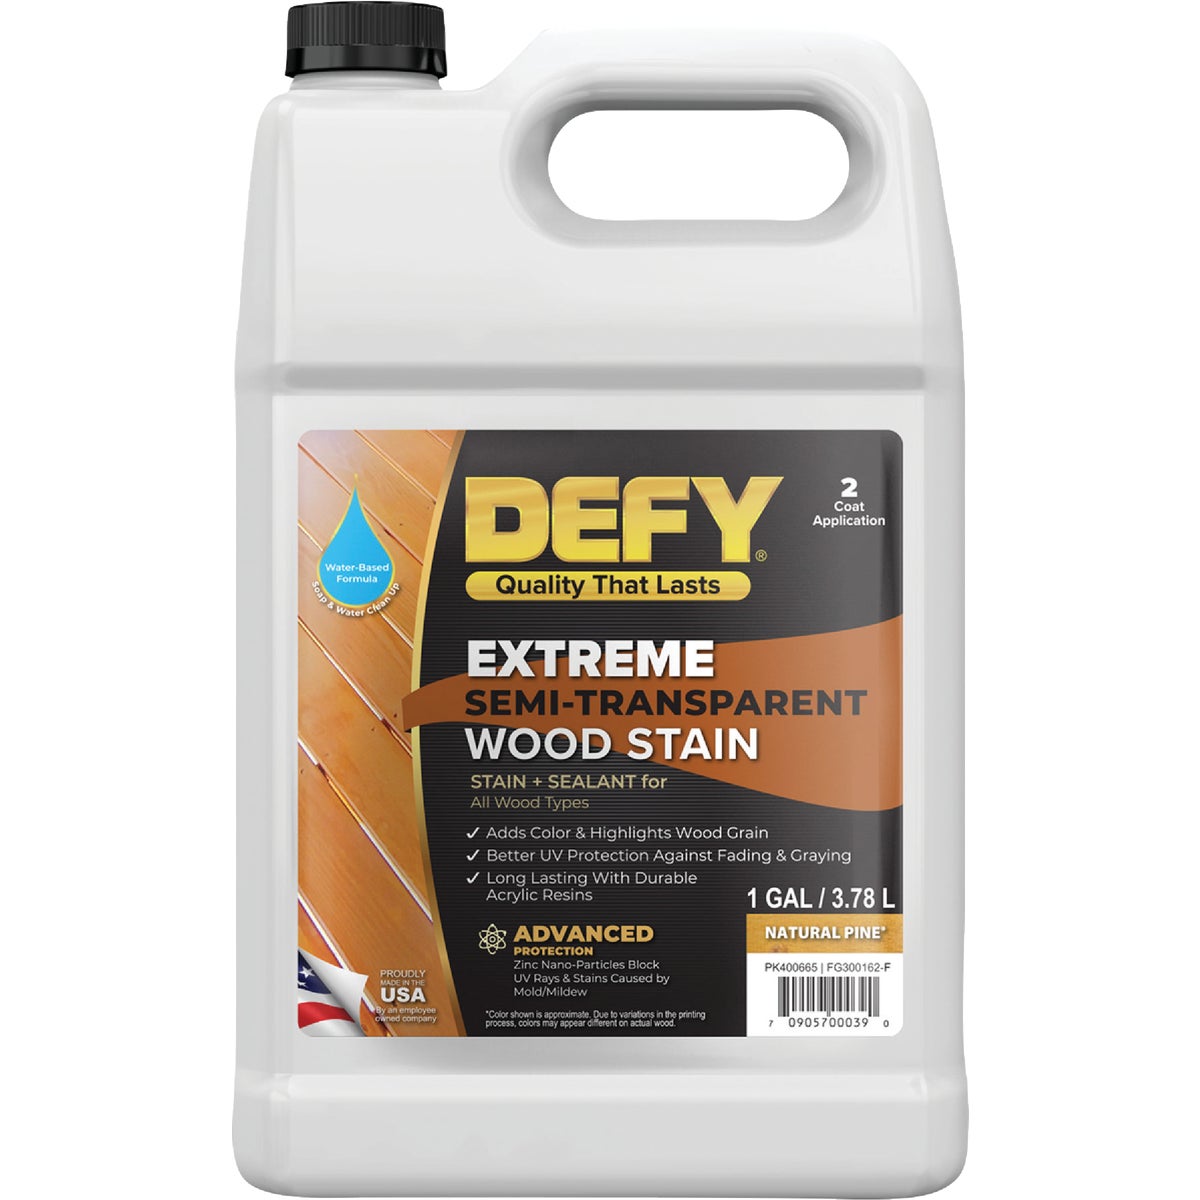 DEFY Extreme Semi-Transparent Exterior Wood Stain, Natural Pine, 1 Gal. Bottle